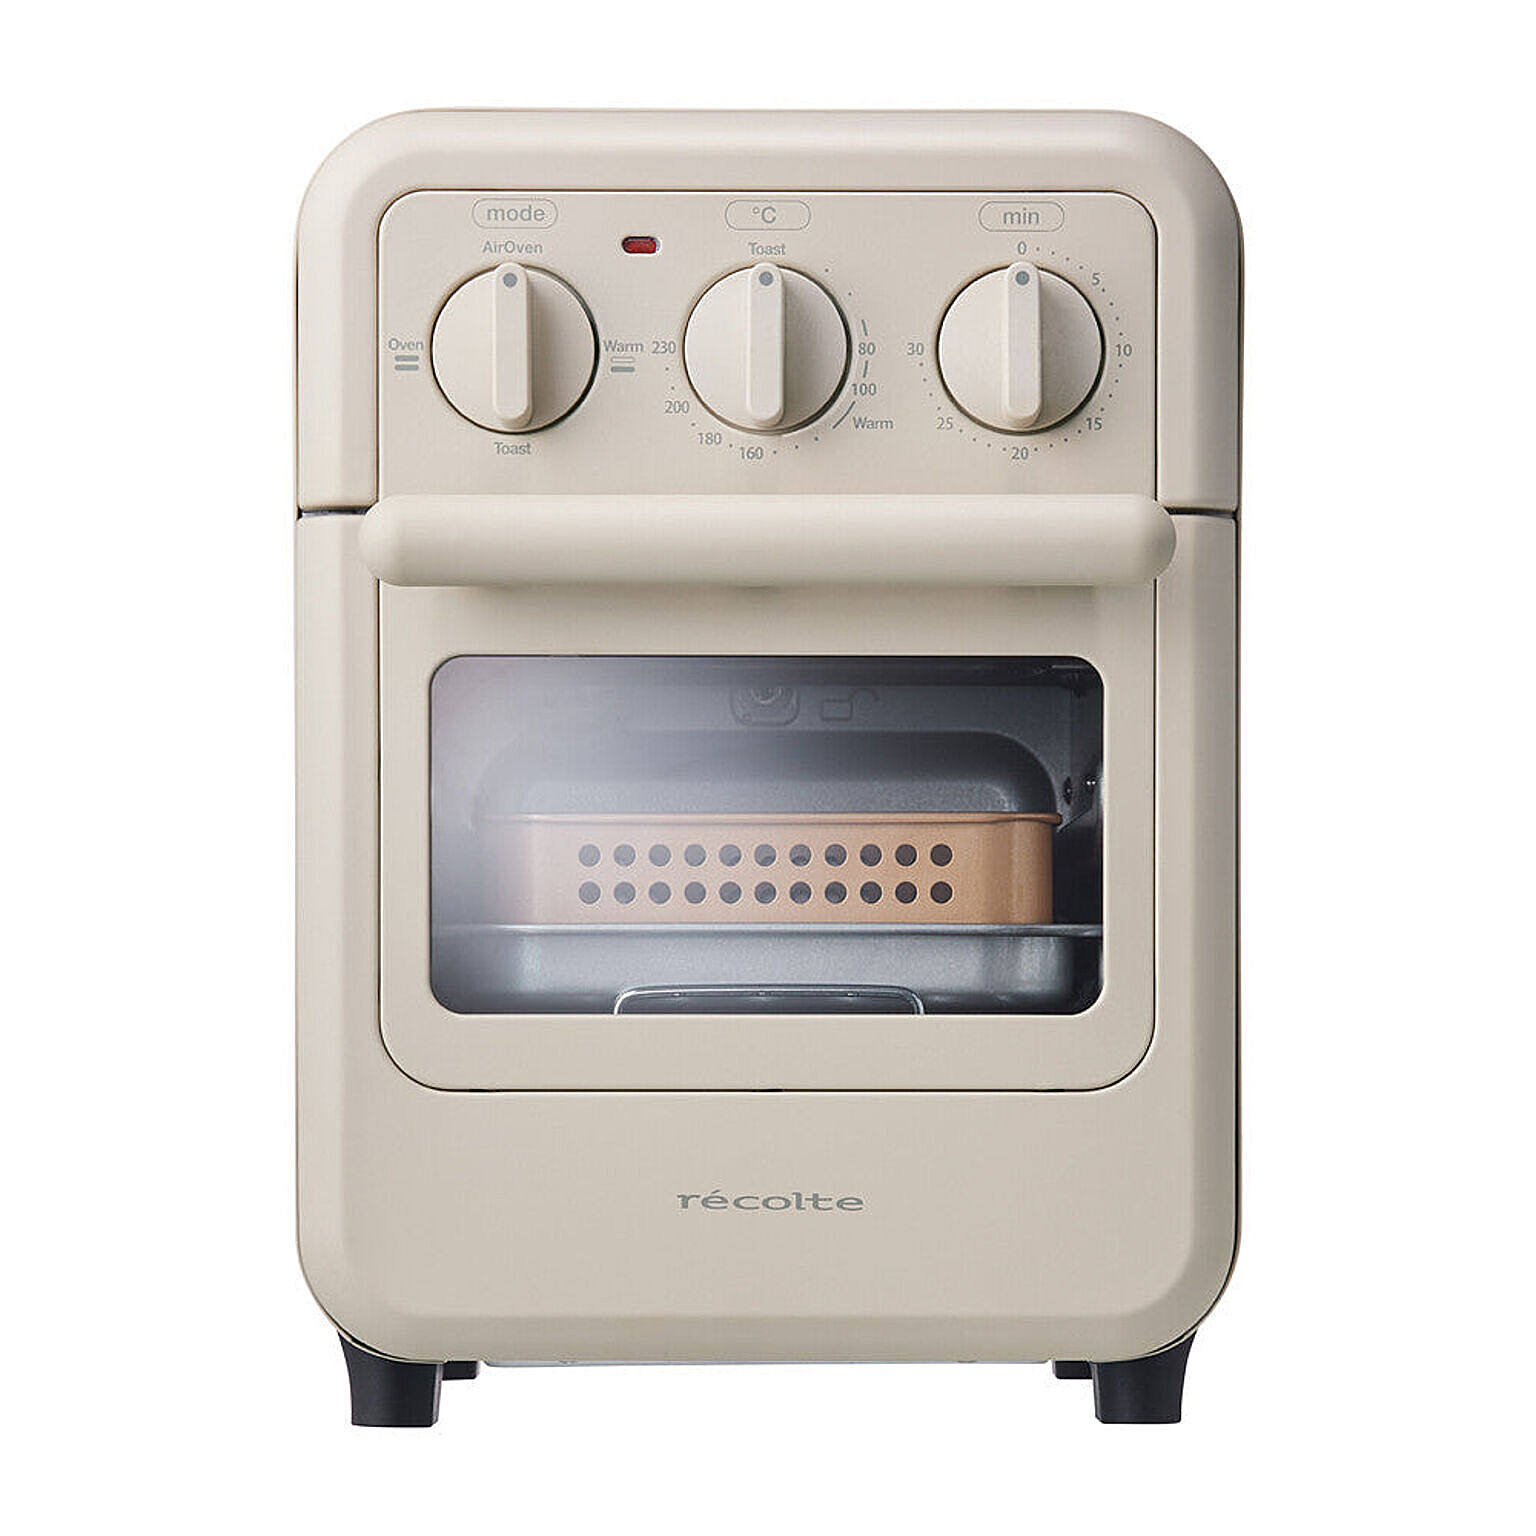 Recolte Air Oven Toaster 初回限定特典付 RFT-1 クリームホワイト